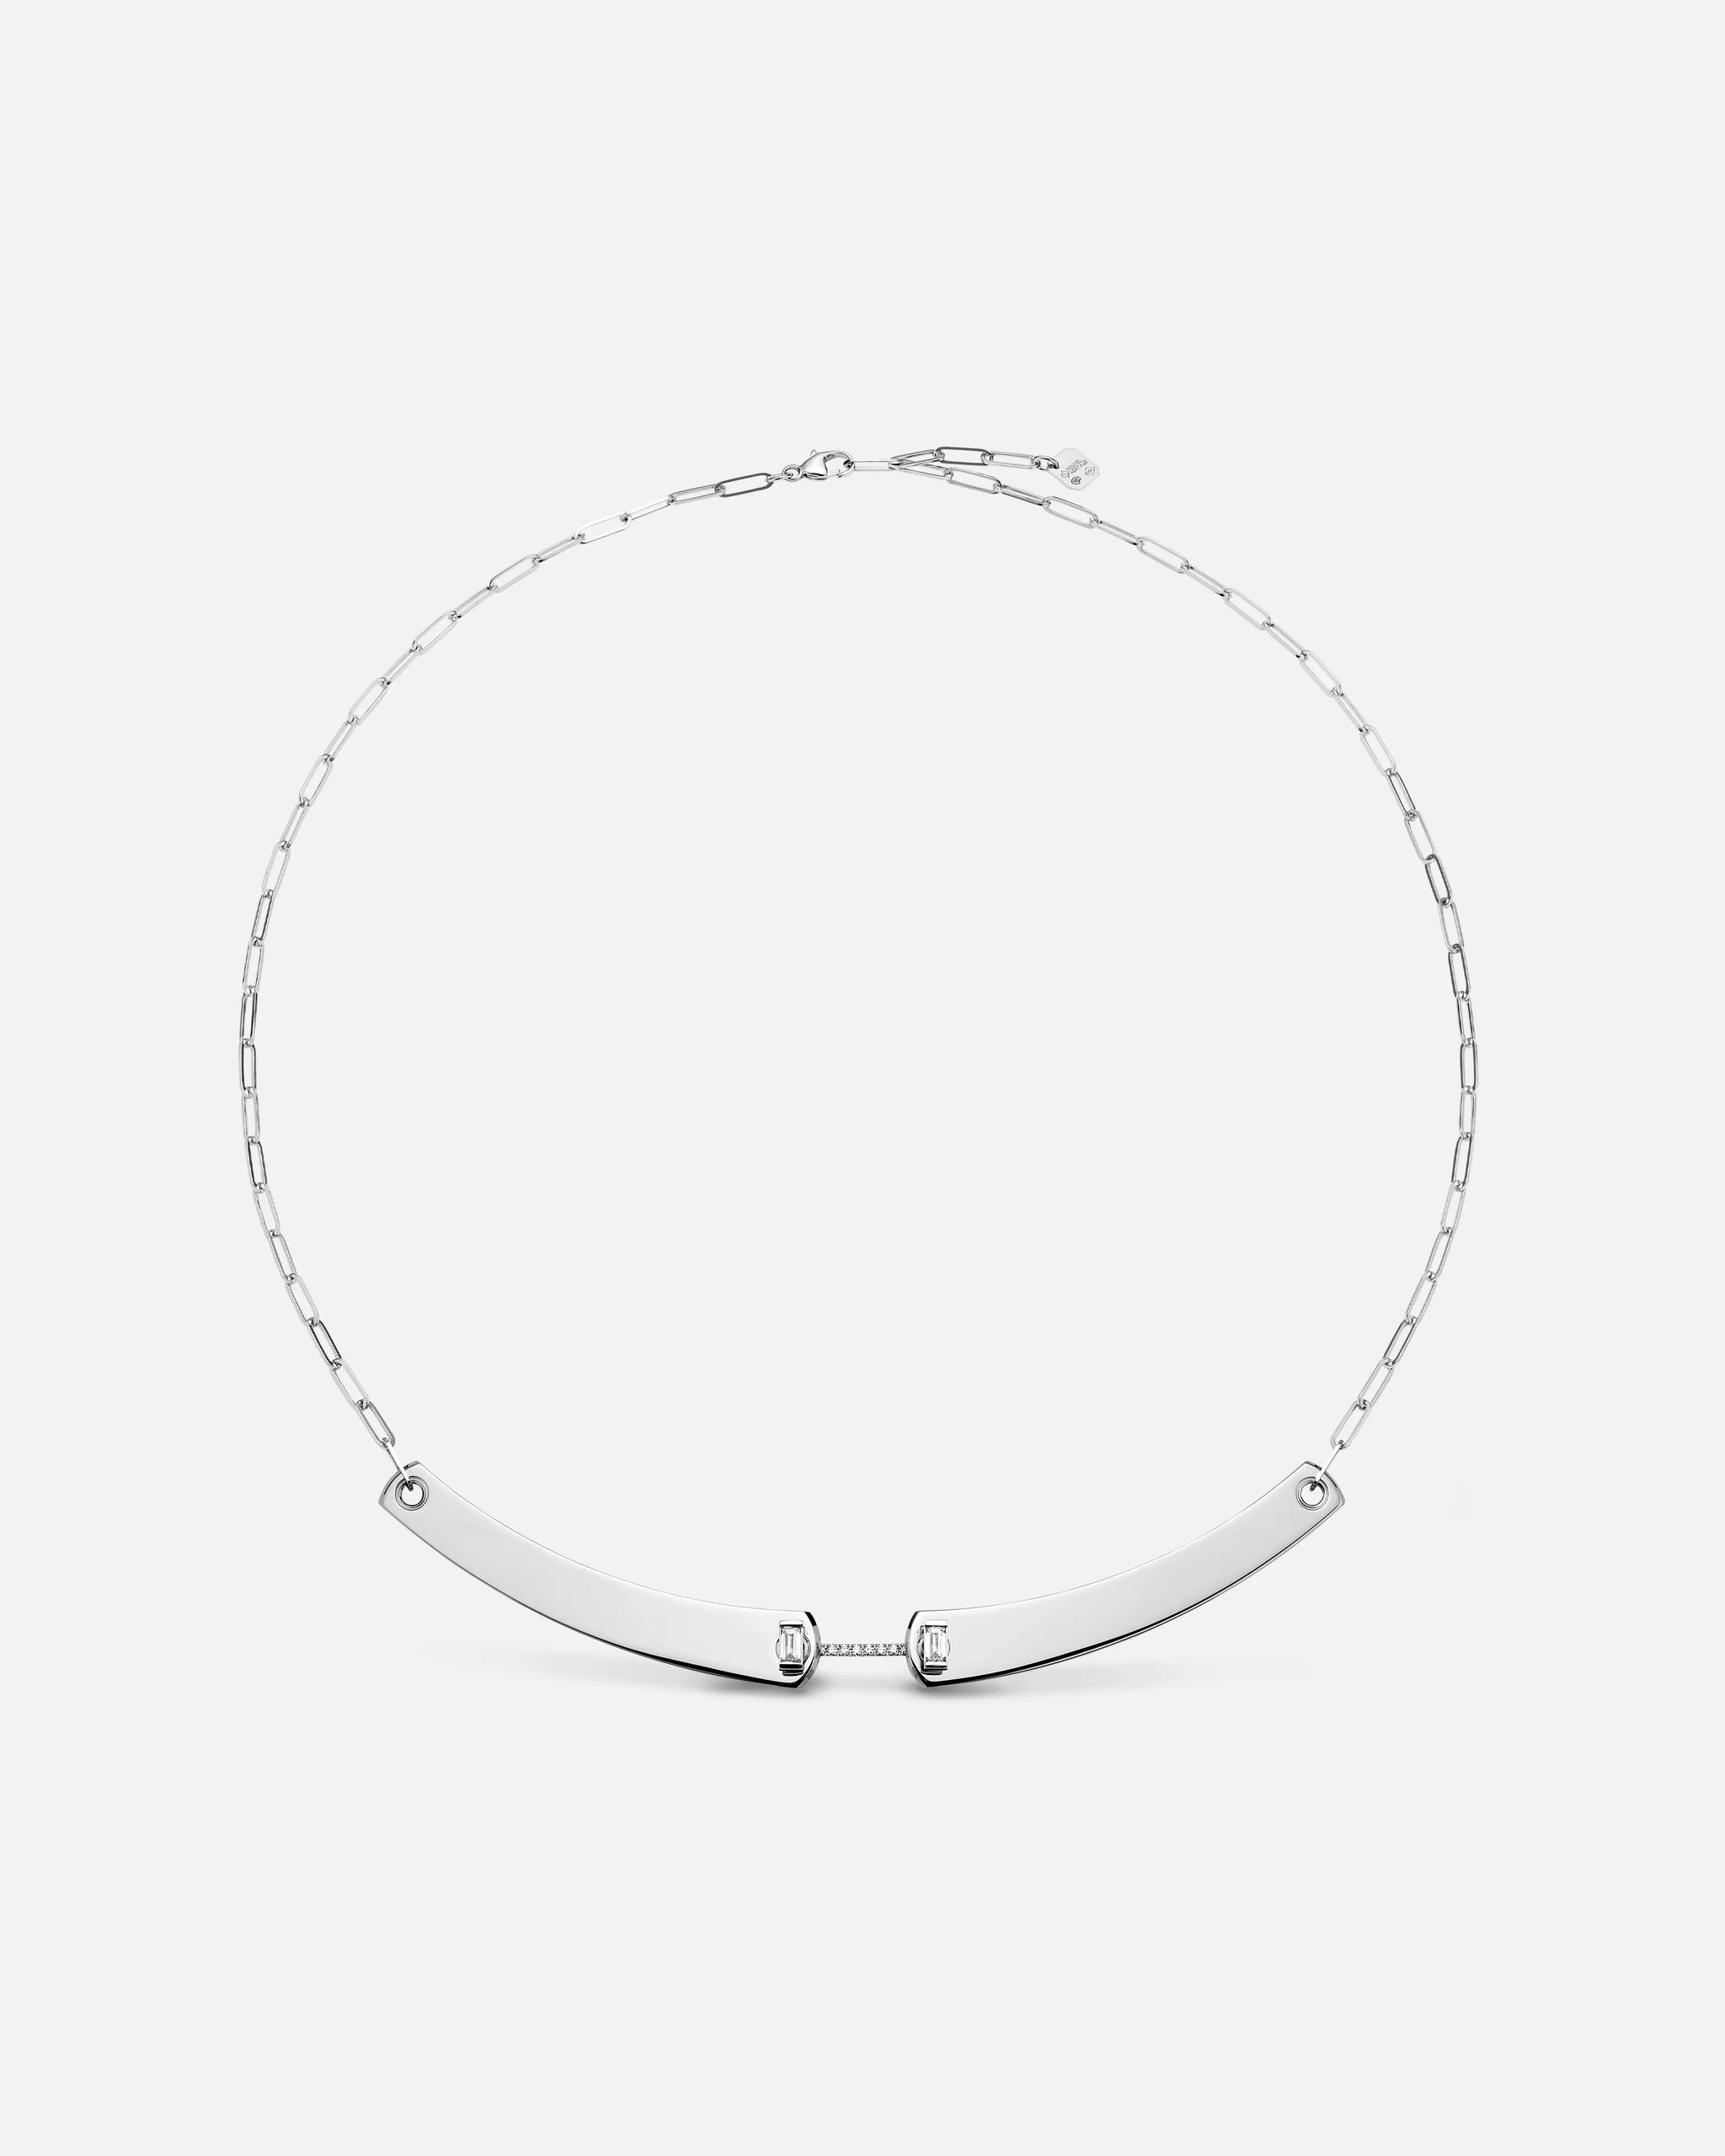 Dinner Date Mood Necklace in White Gold - 1 - Nouvel Heritage